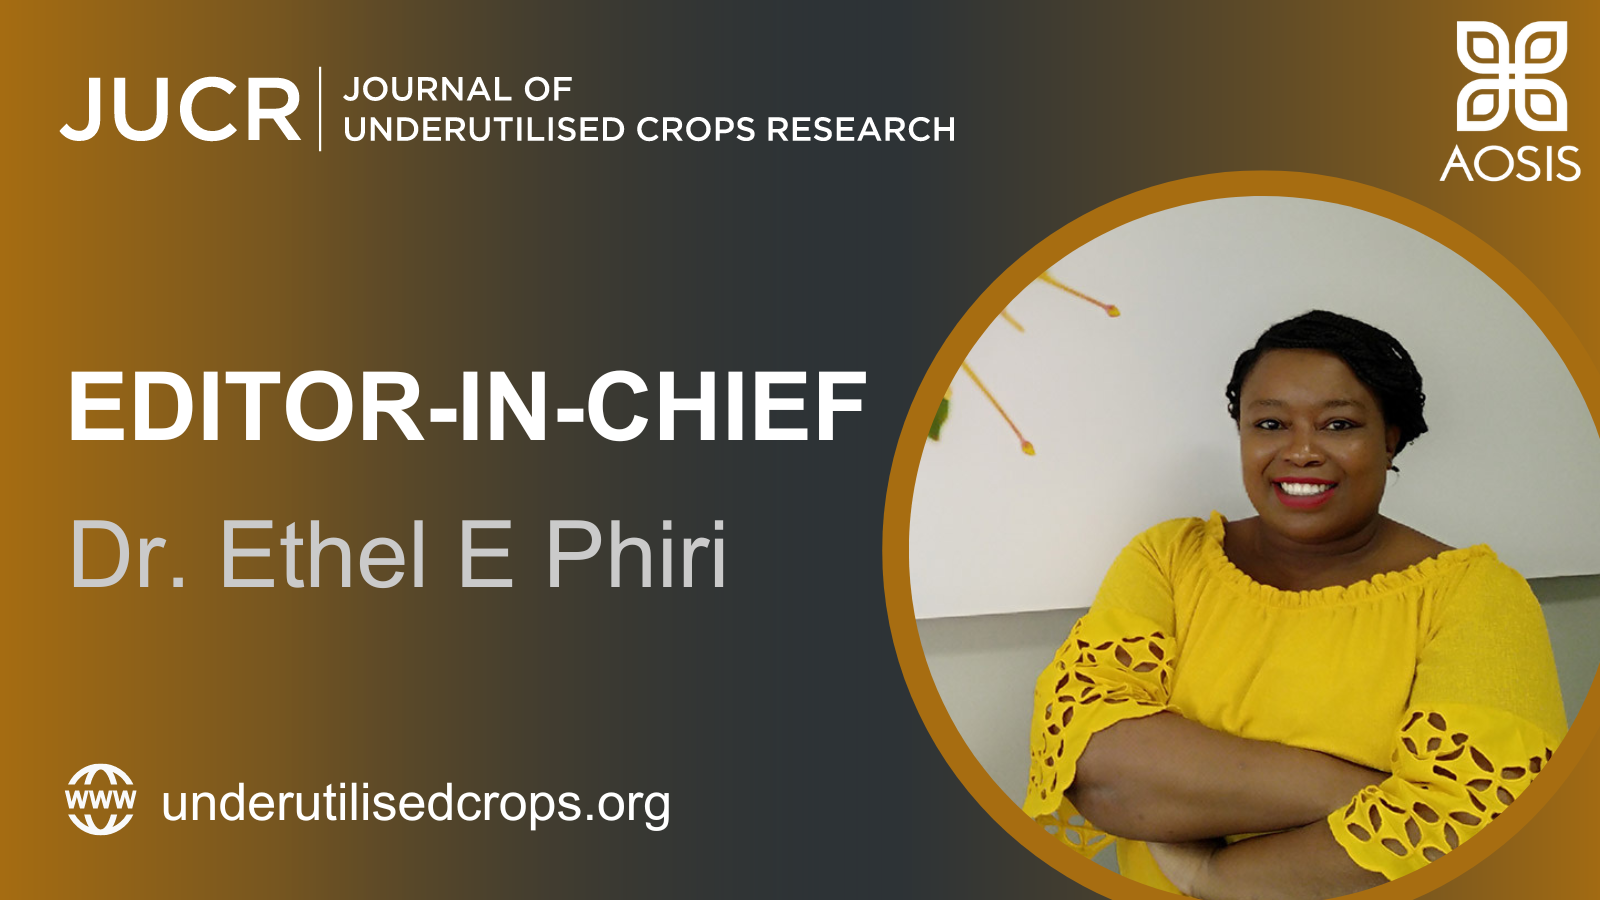 Introducing the Editor-in-Chief of the Journal of Underutilised Crops Research